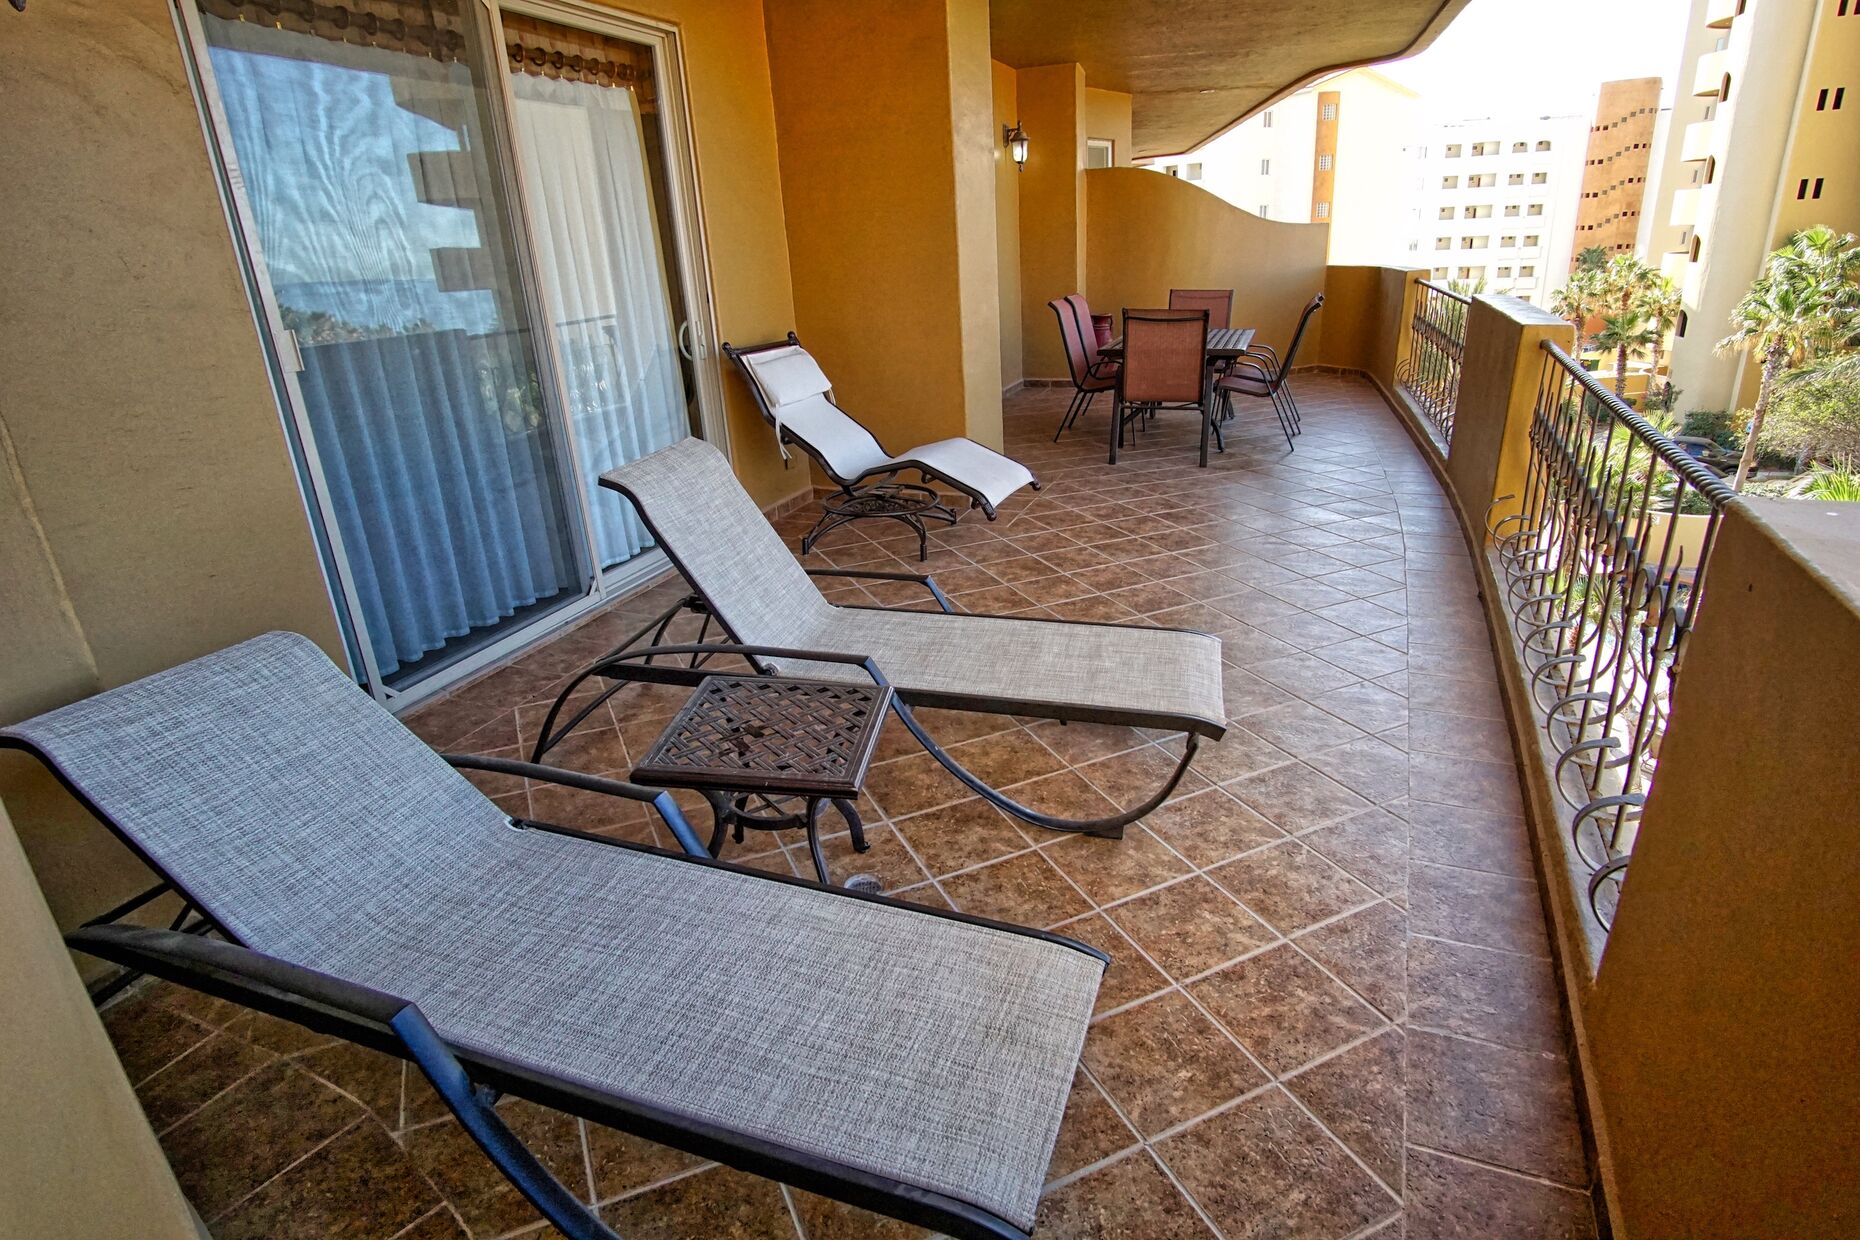 Large patio with chaise lounges nd a dining table as well.